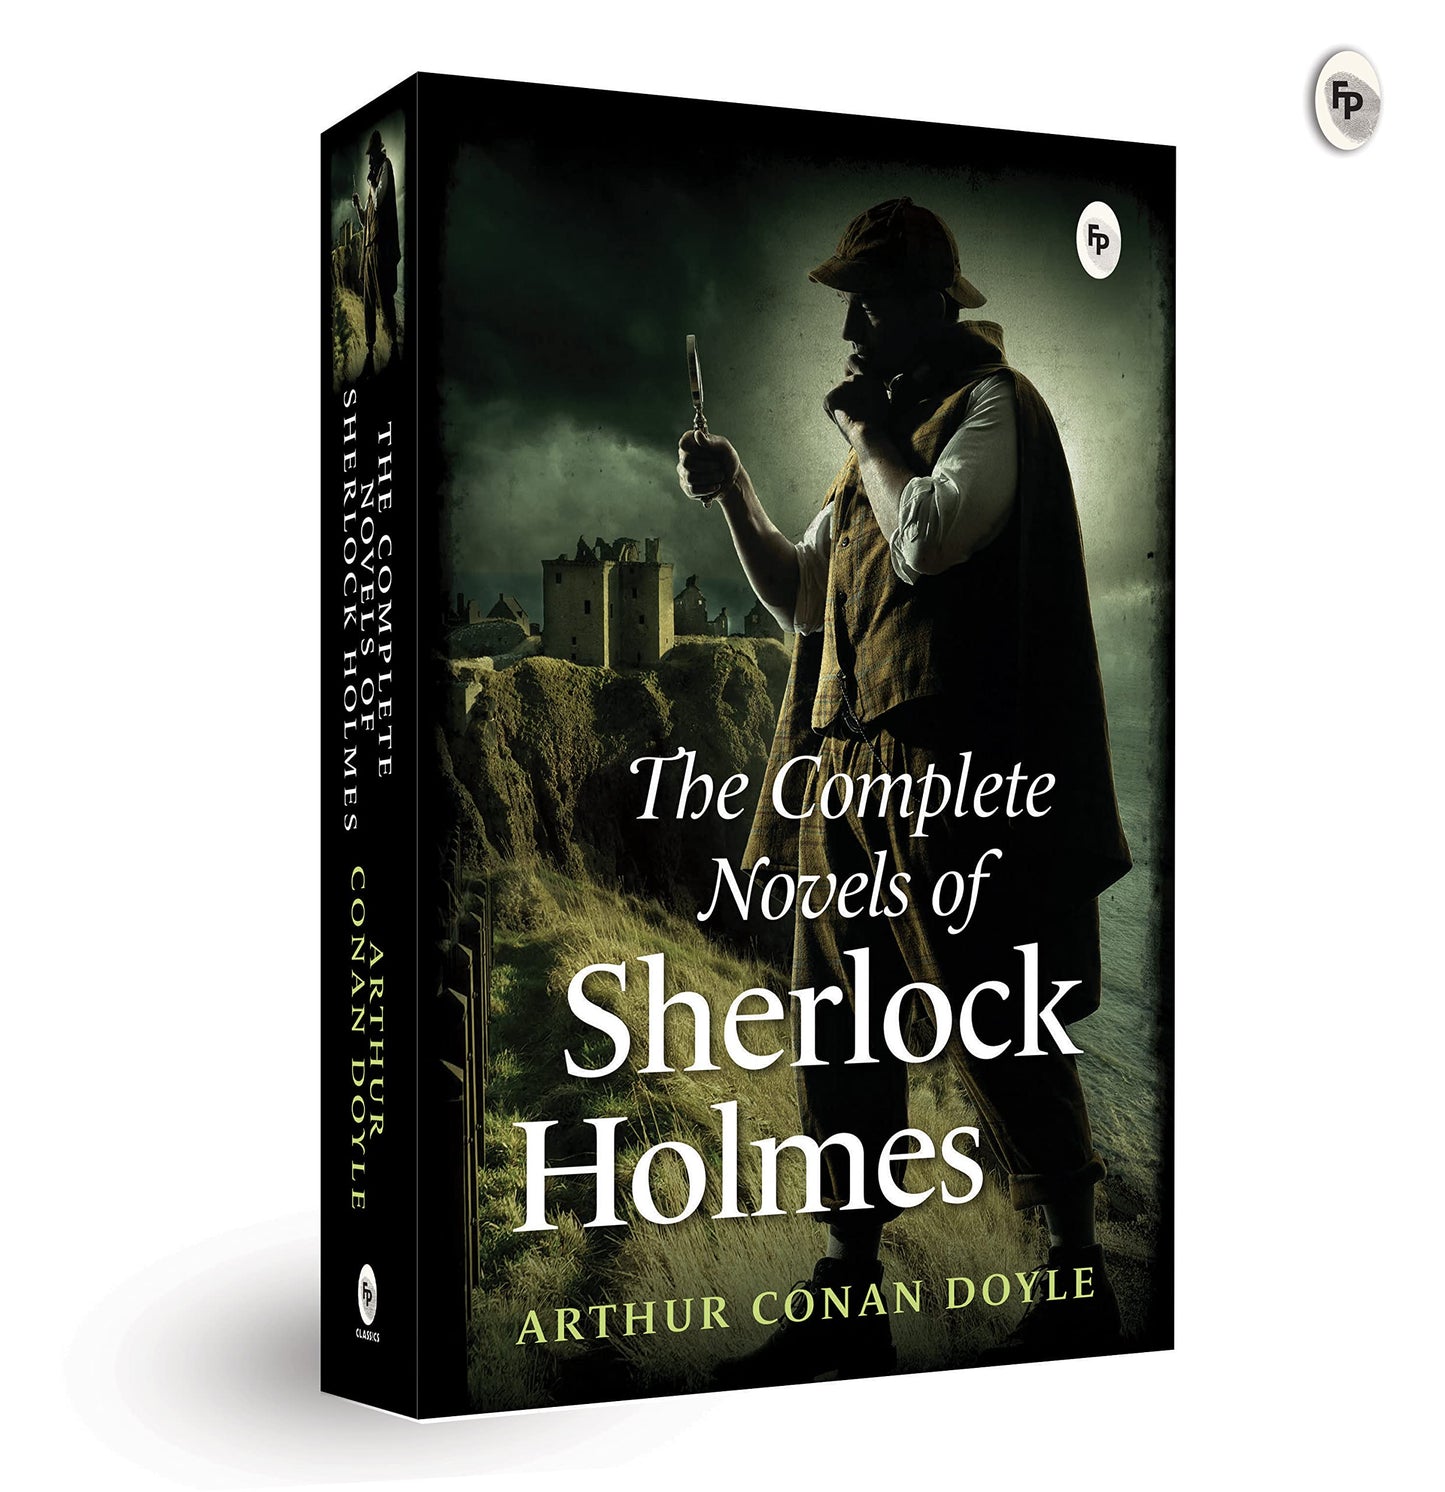 The Best of Sherlock Holmes (Set of 2 Books)